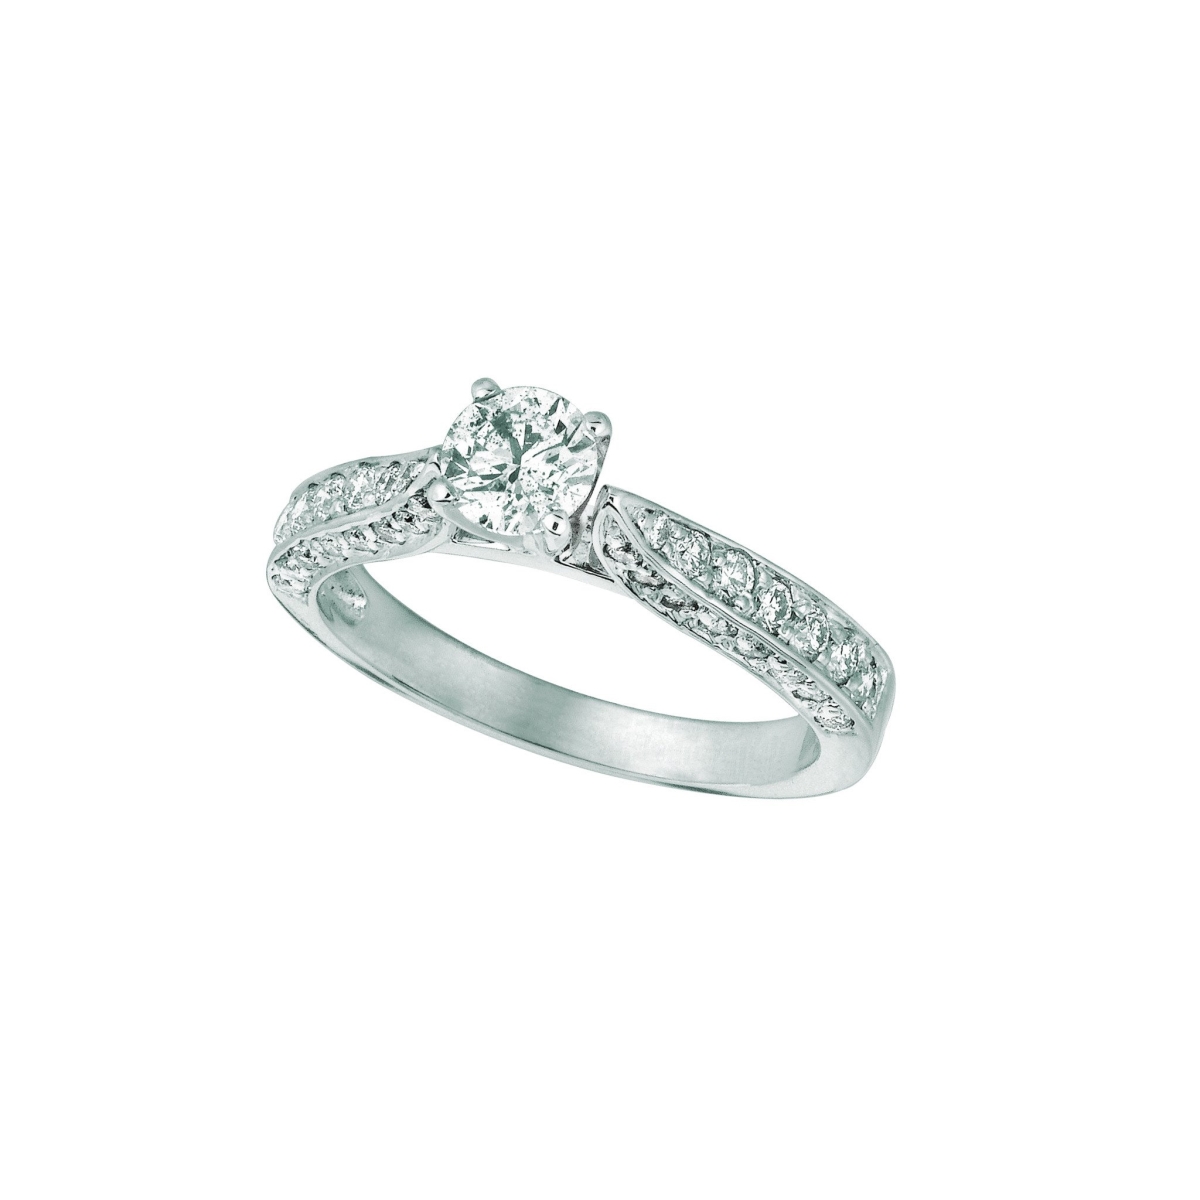 Picture of Harry Chad Enterprises 18577 1 CT Solitaire with Accents Diamond Fancy Ring, Size 6.5